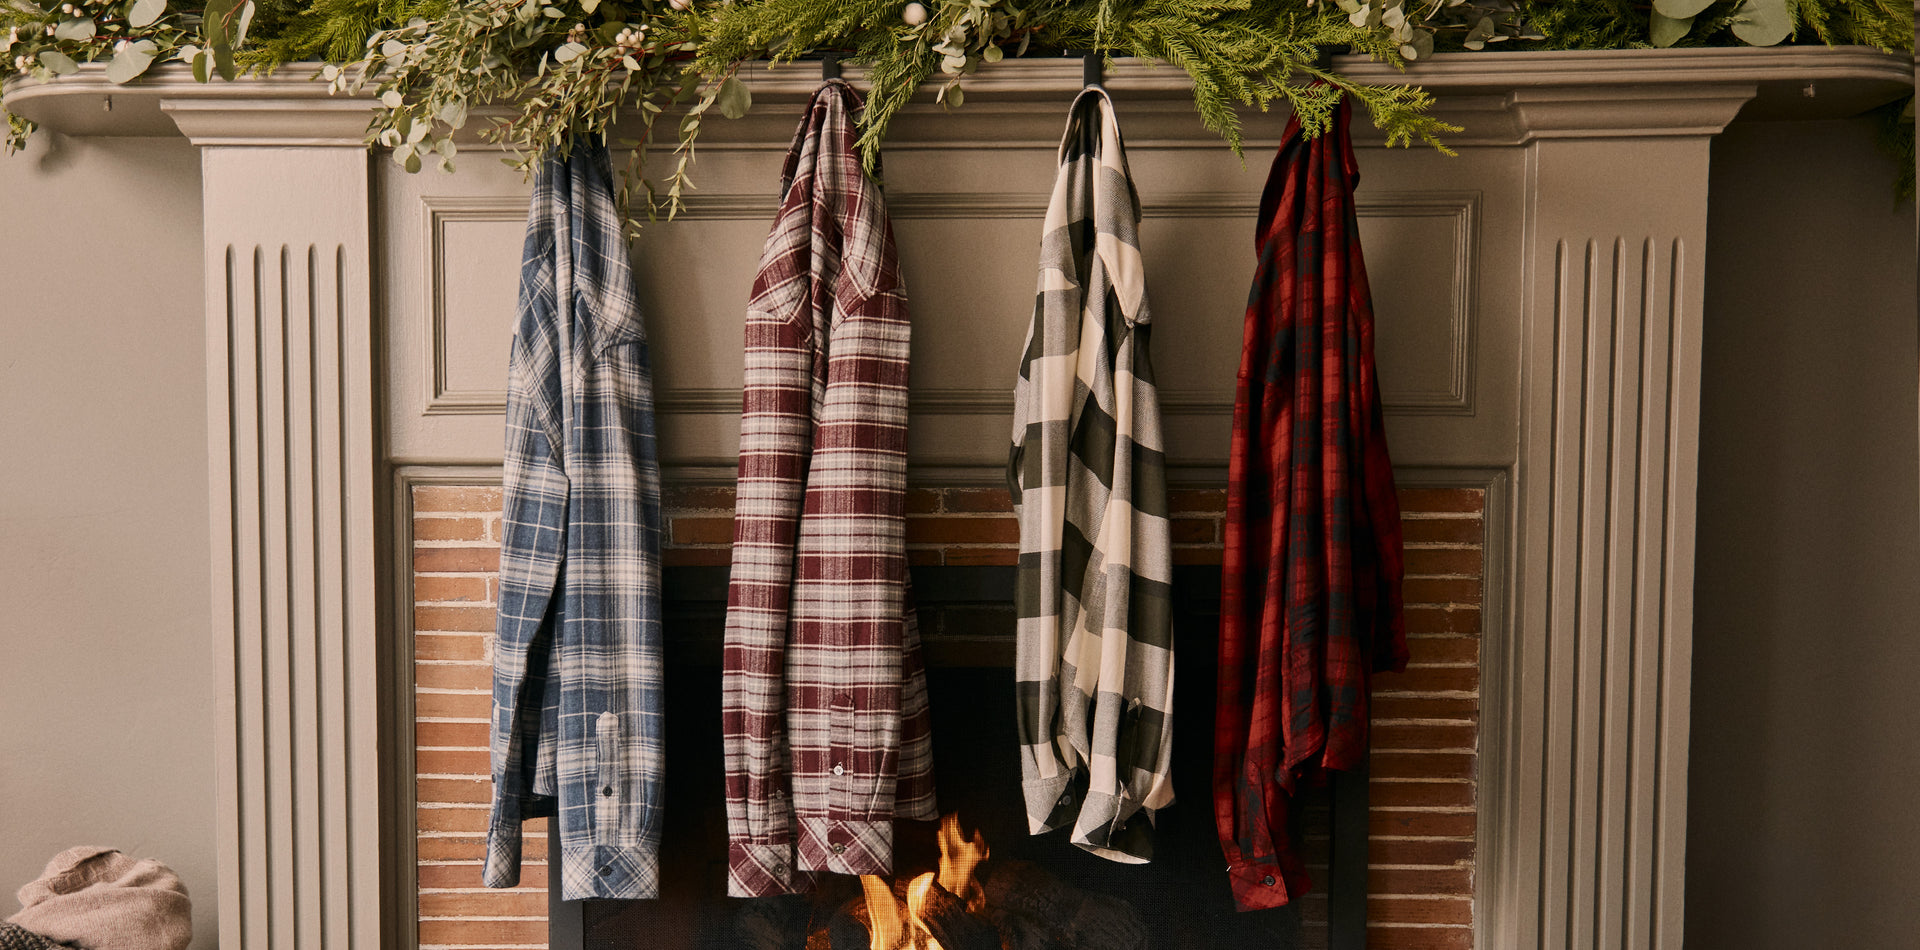 EDITORIAL IMAGE OF MULTIPLE PLAID SHIRTS HANGING ON FIREPLACE